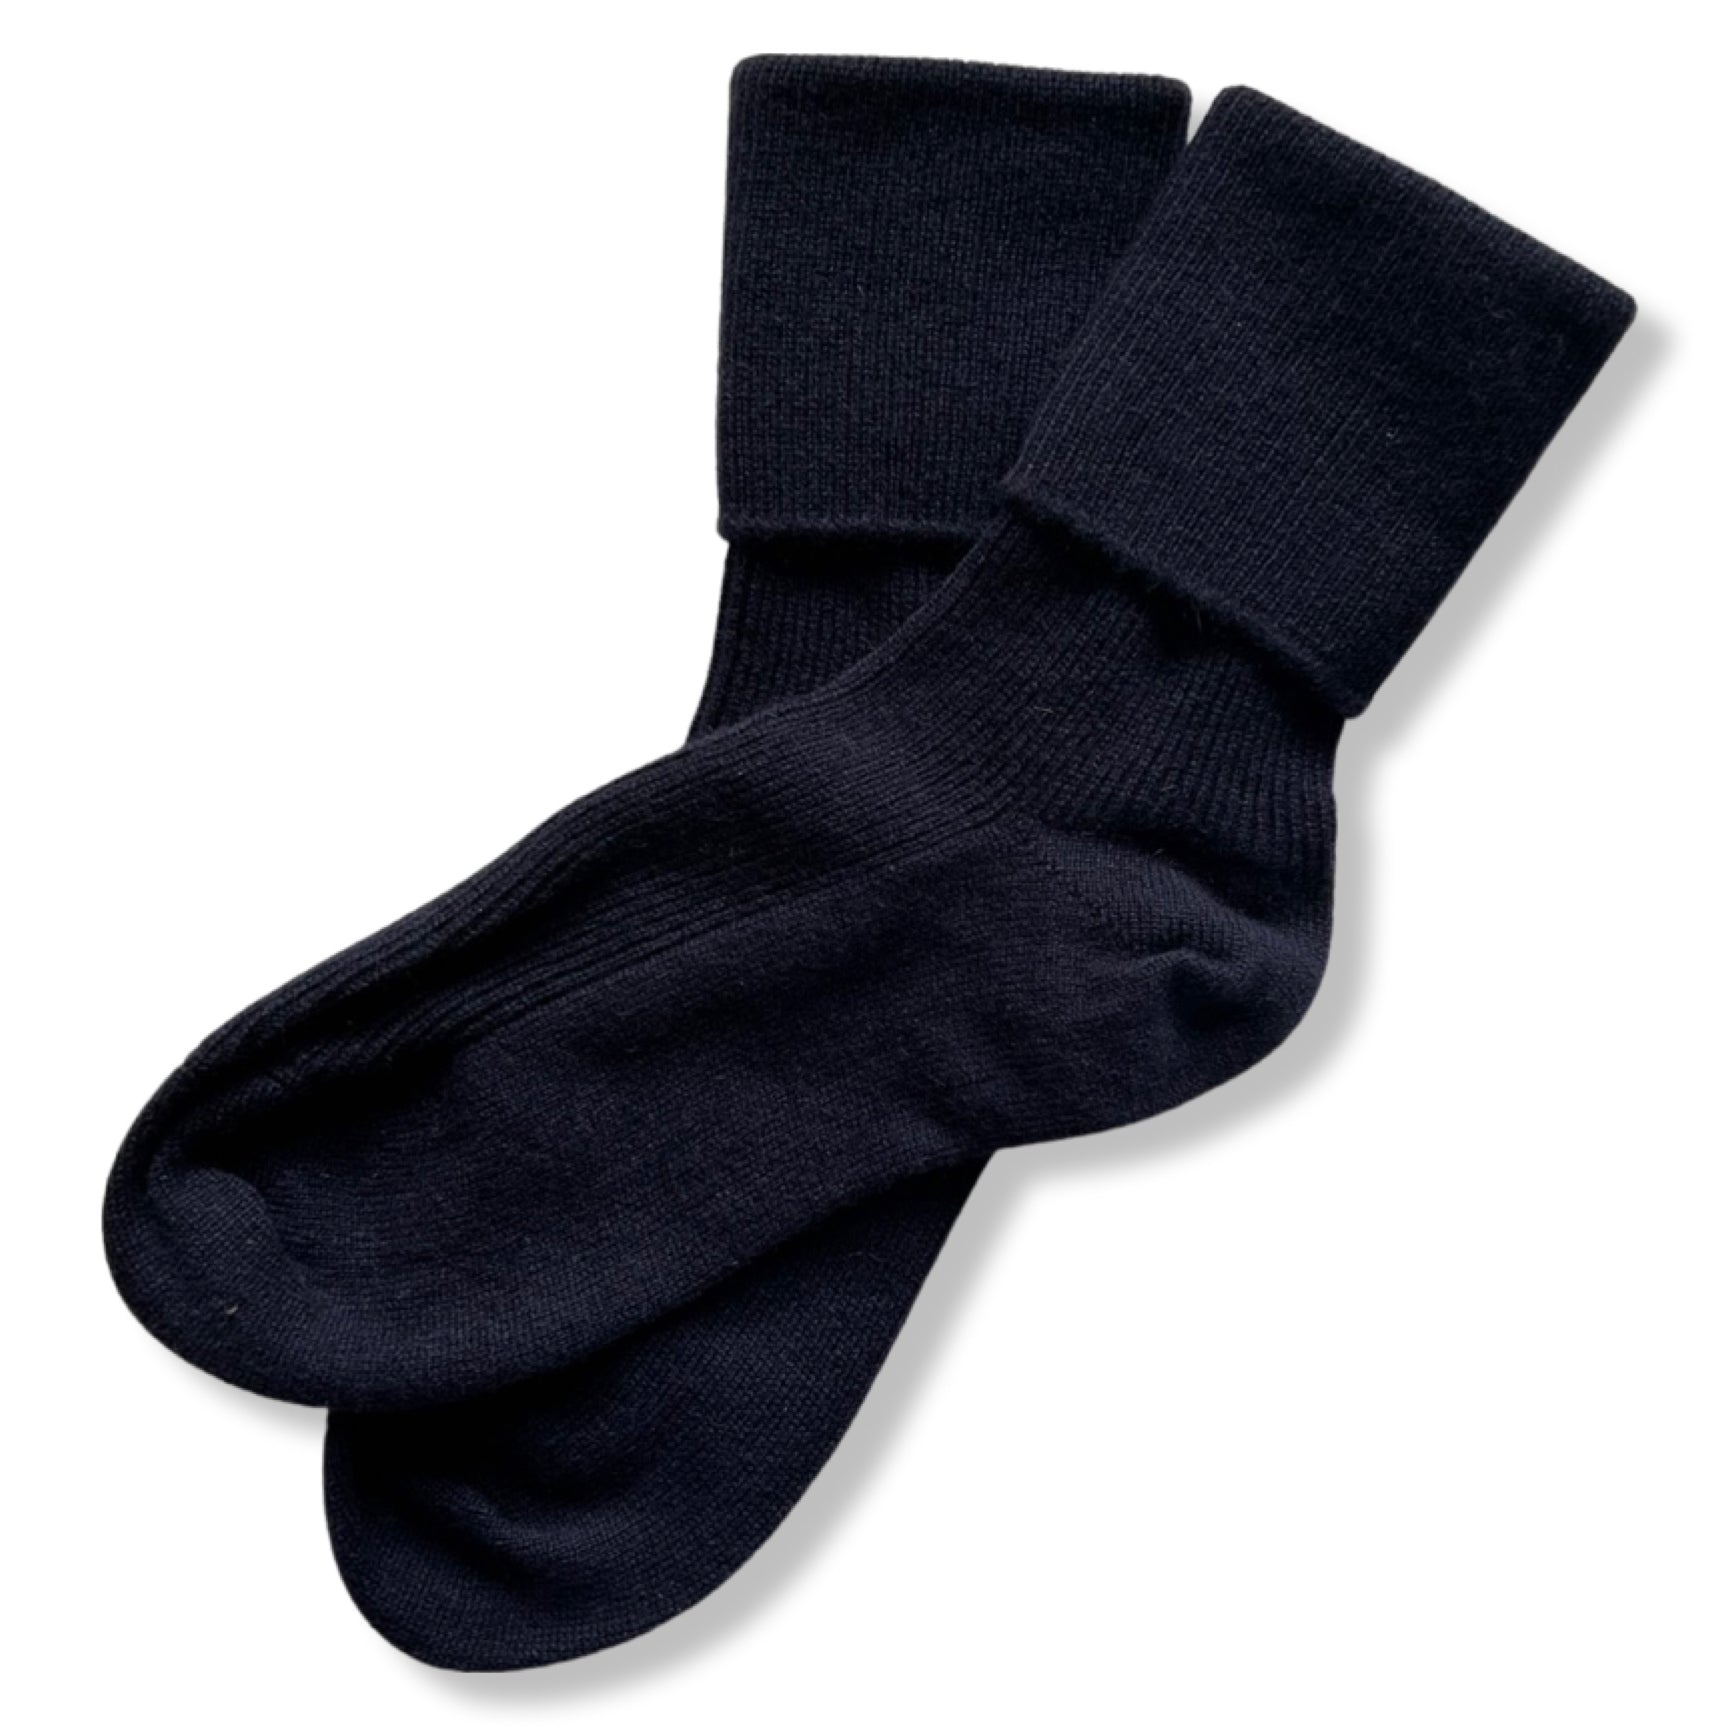 Womens Cashmere Socks, Scarves, Hickman & Bousfied - Hickman & Bousfield, Safari and Travel Clothing